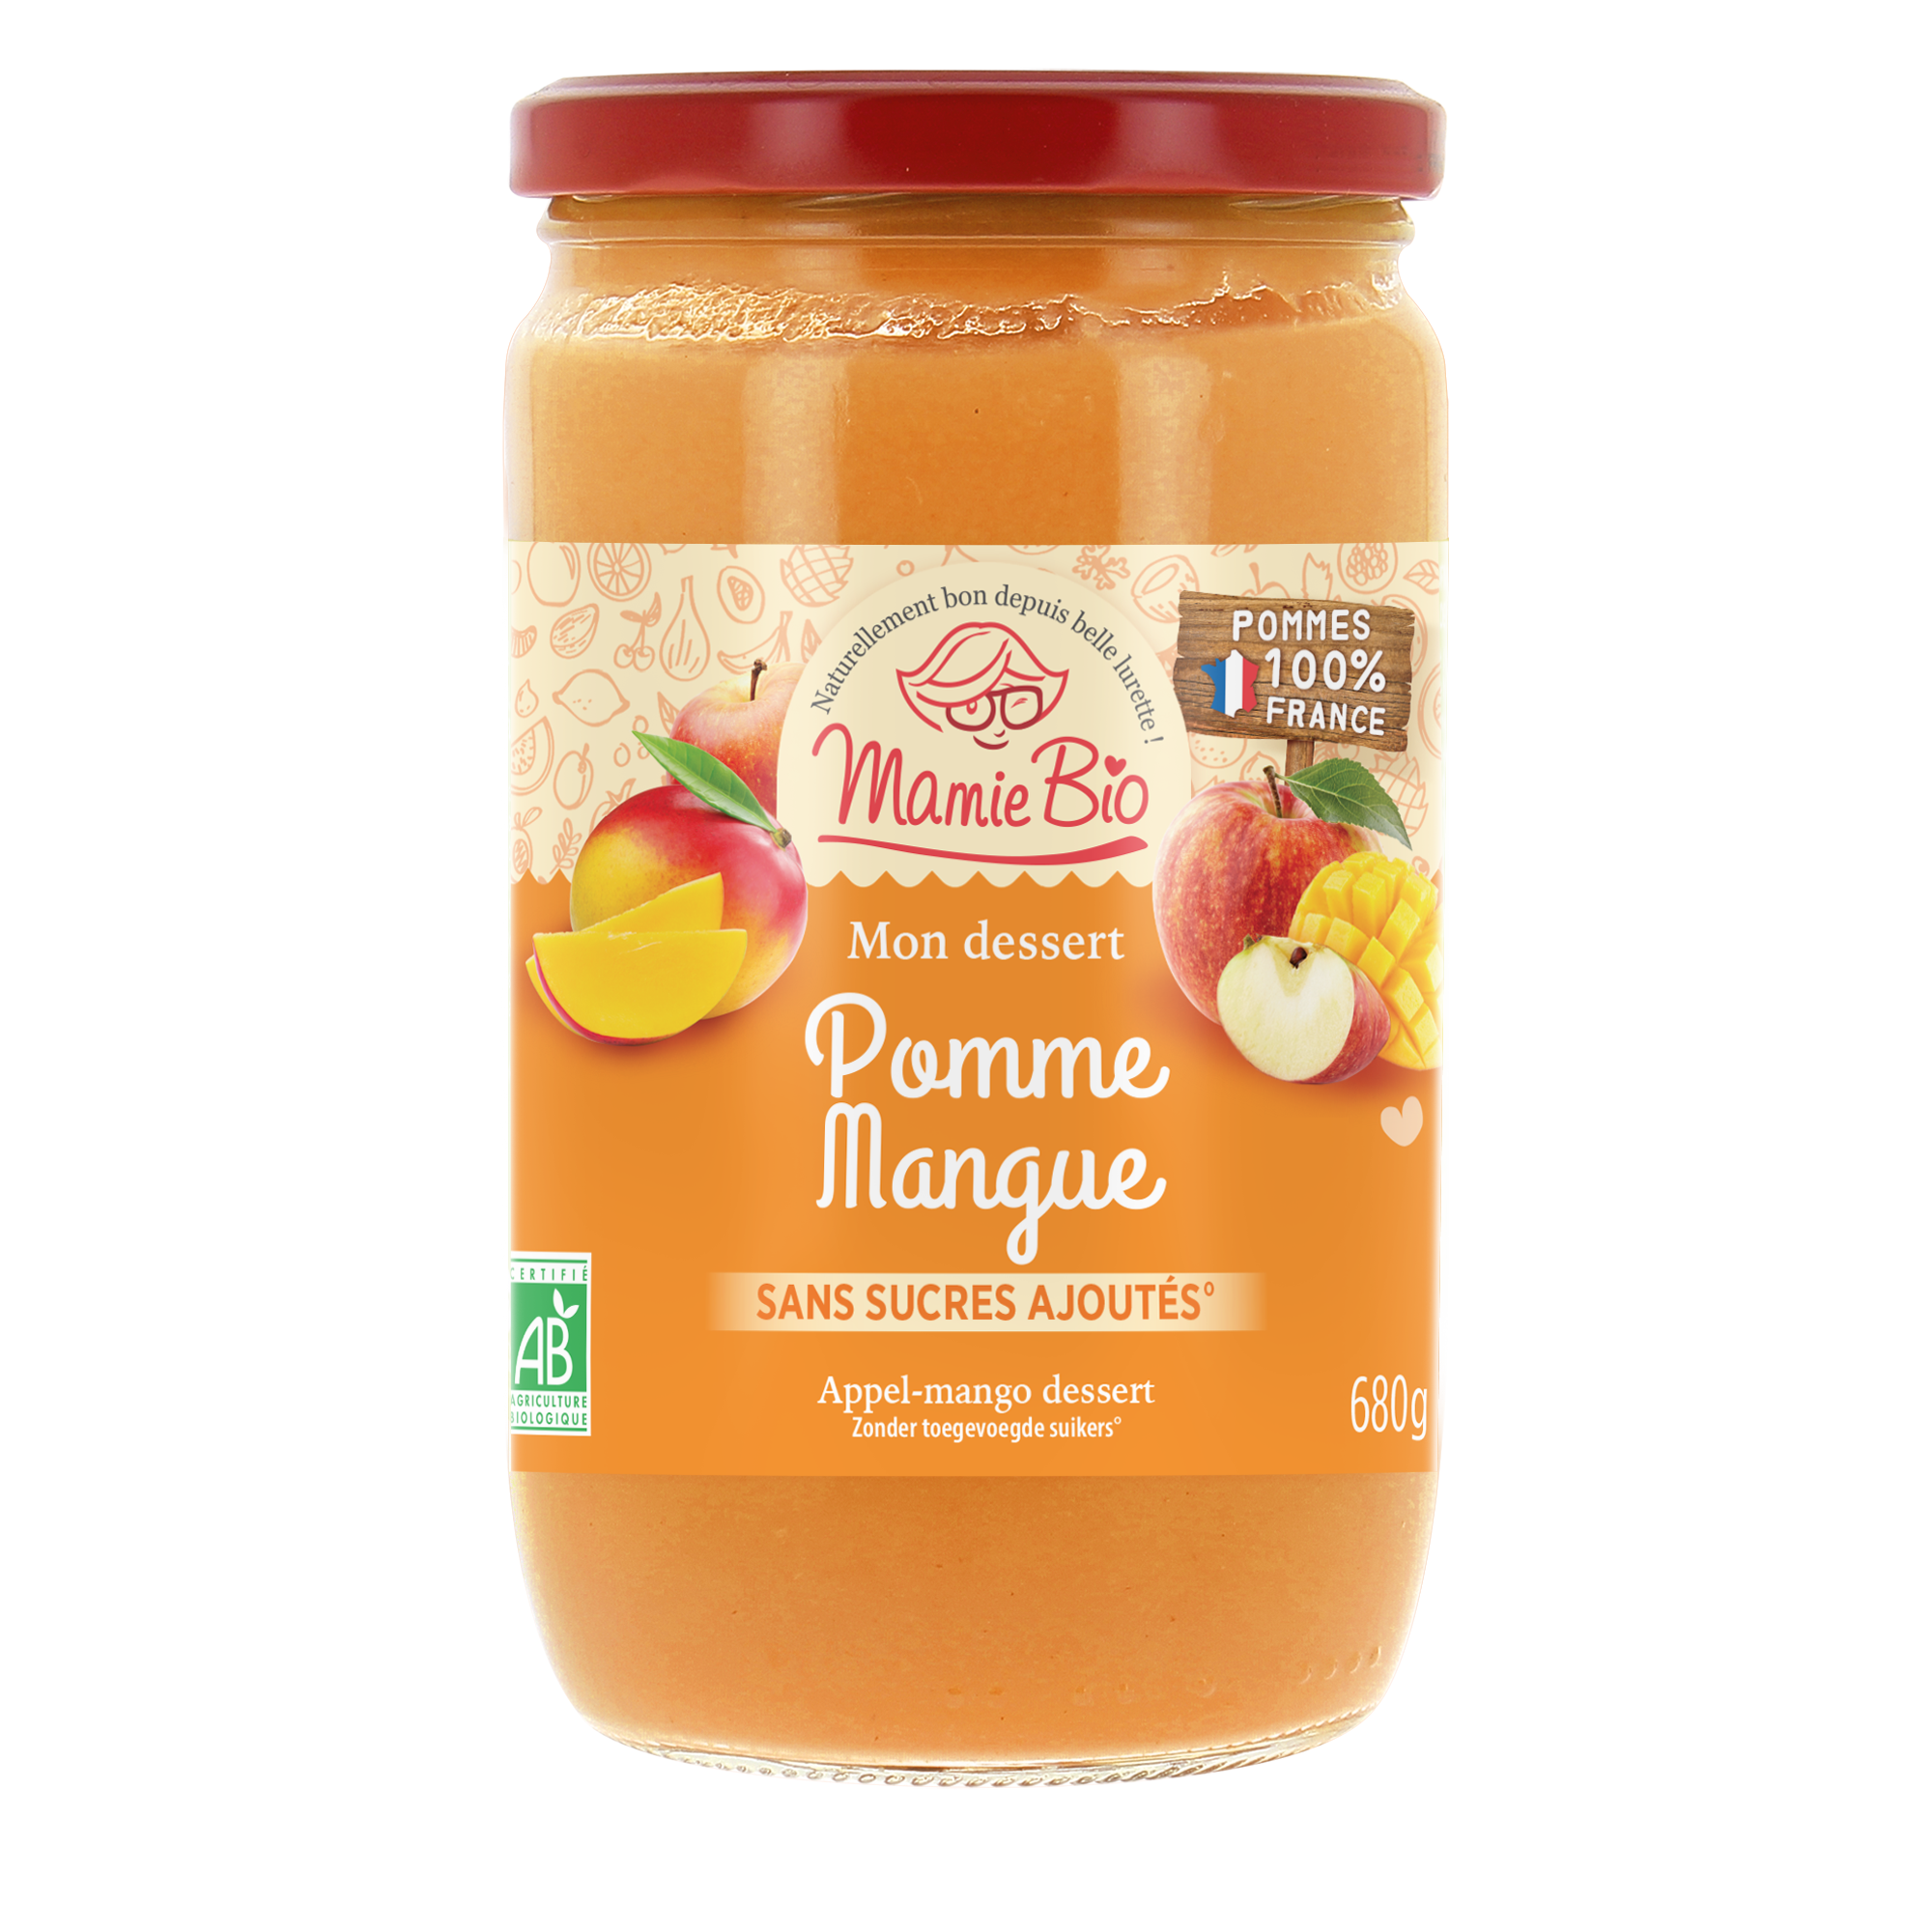 Organic Puree of Apple from France and Fairtrade Mango